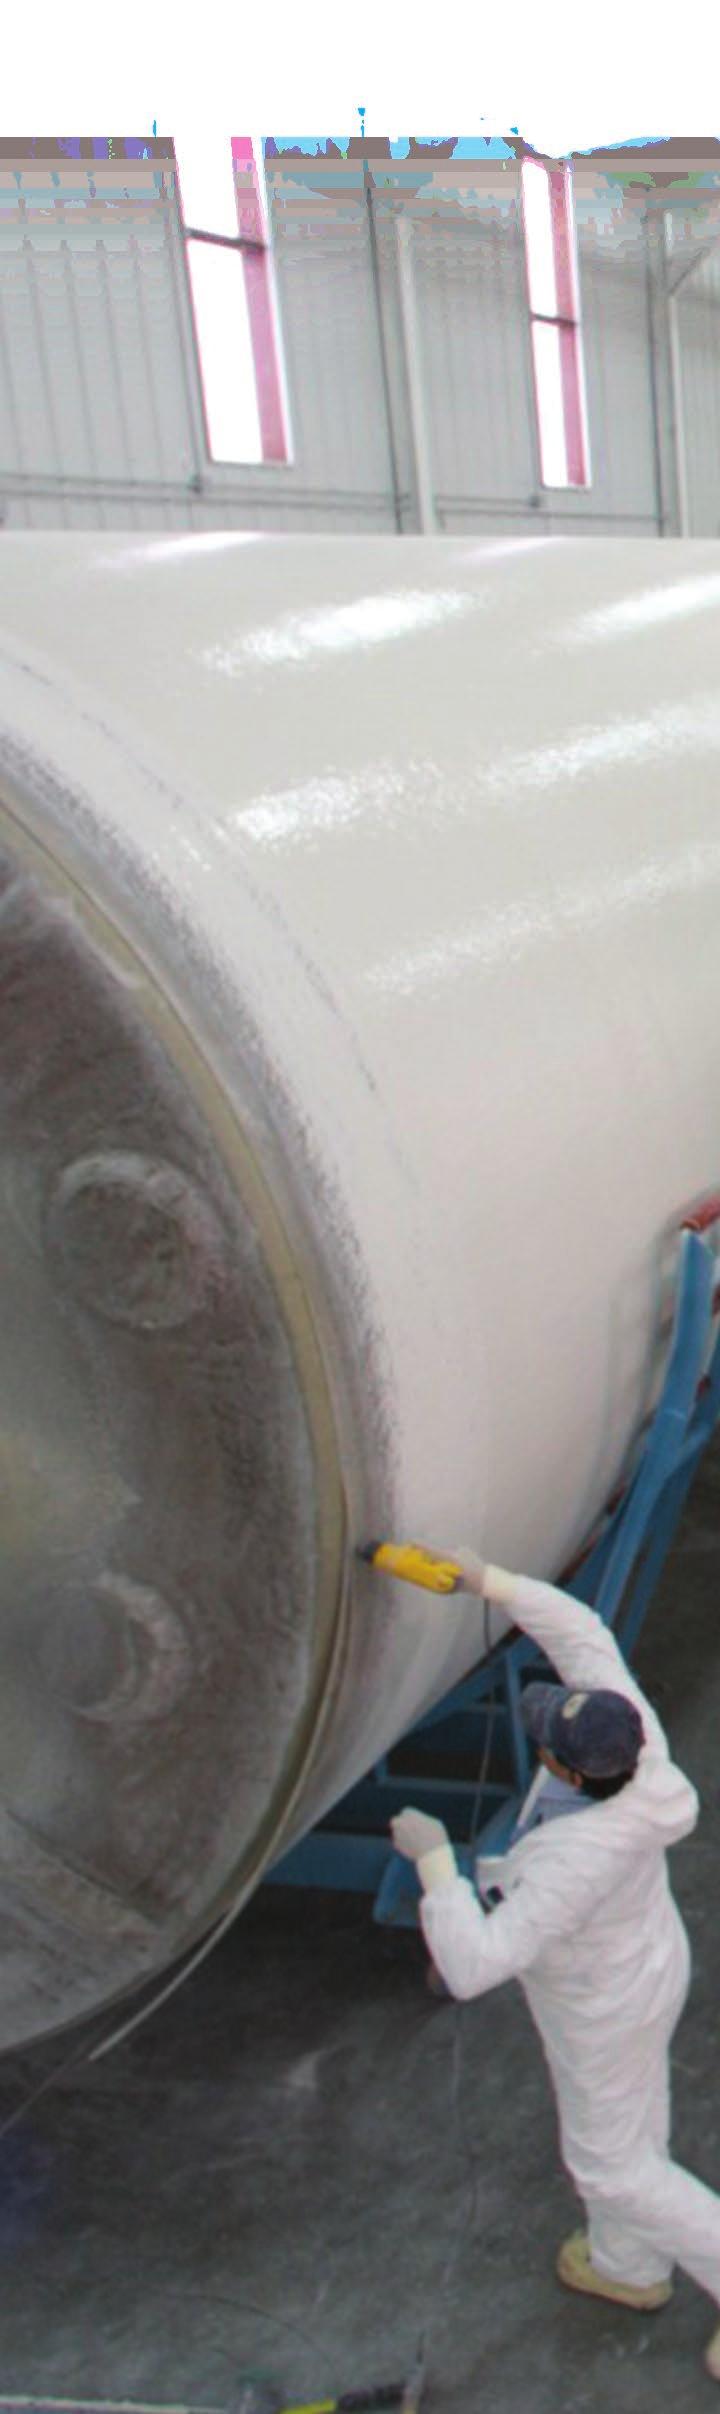 OUR MANUFACTURING PROCESS Worthington Industries makes fiberglass tanks utilizing a modern, automated filament winding technique.